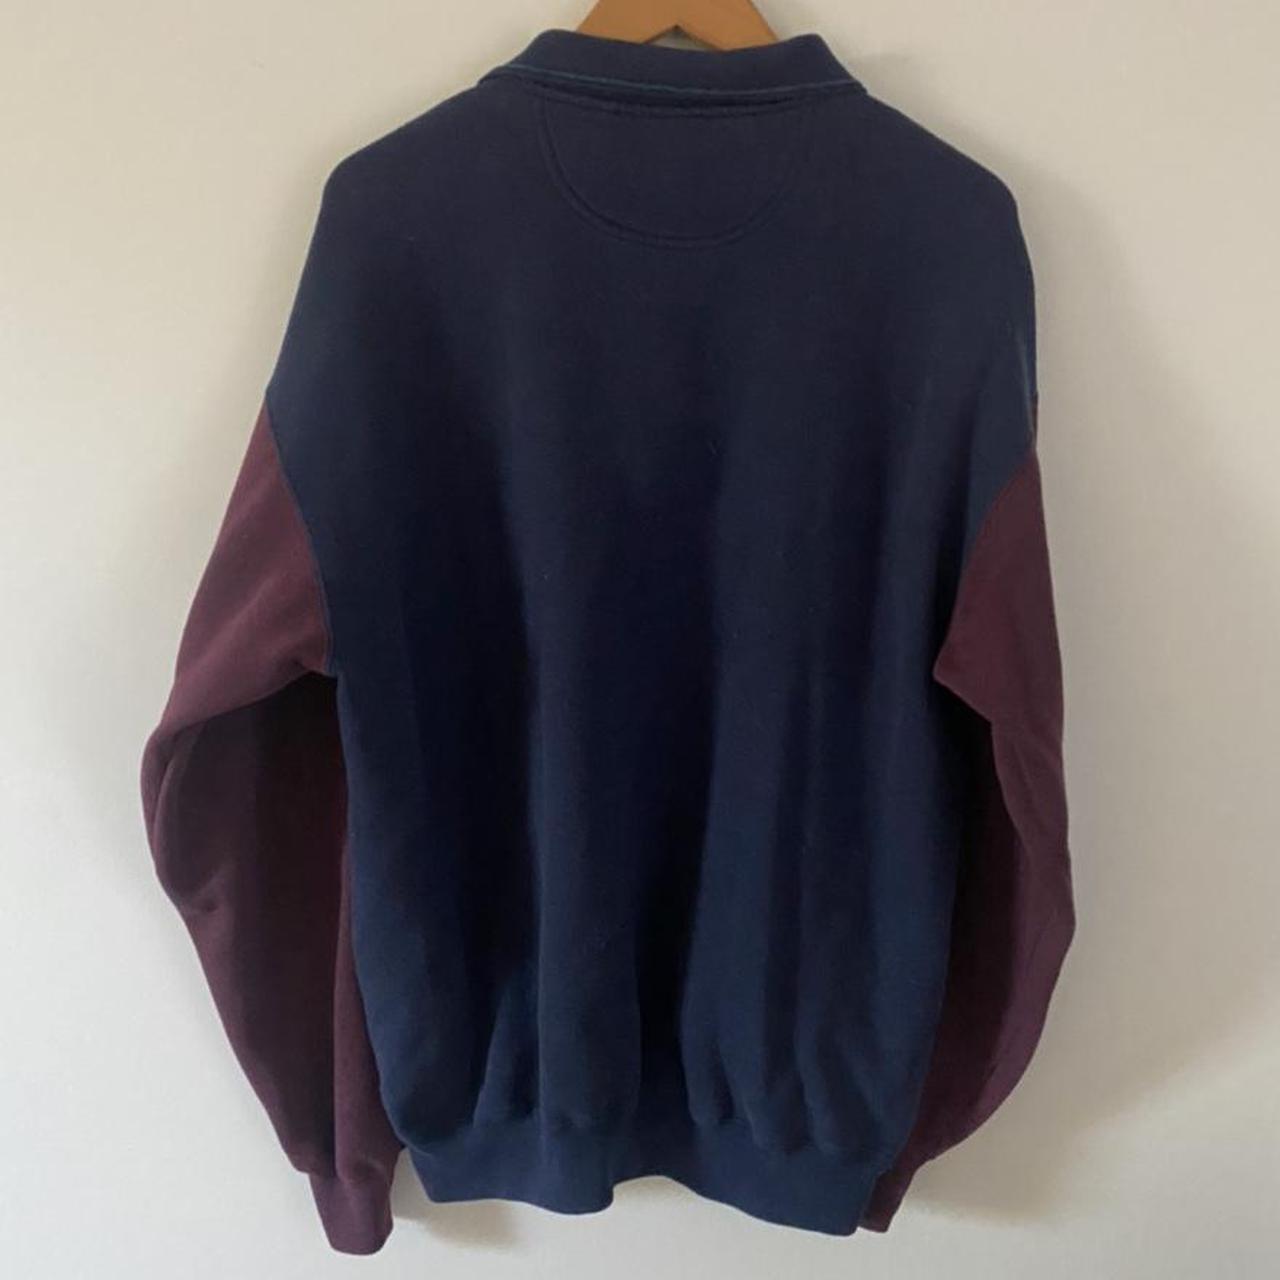 Product Image 3 - Vintage multicolored sweatshirt rugby top
No